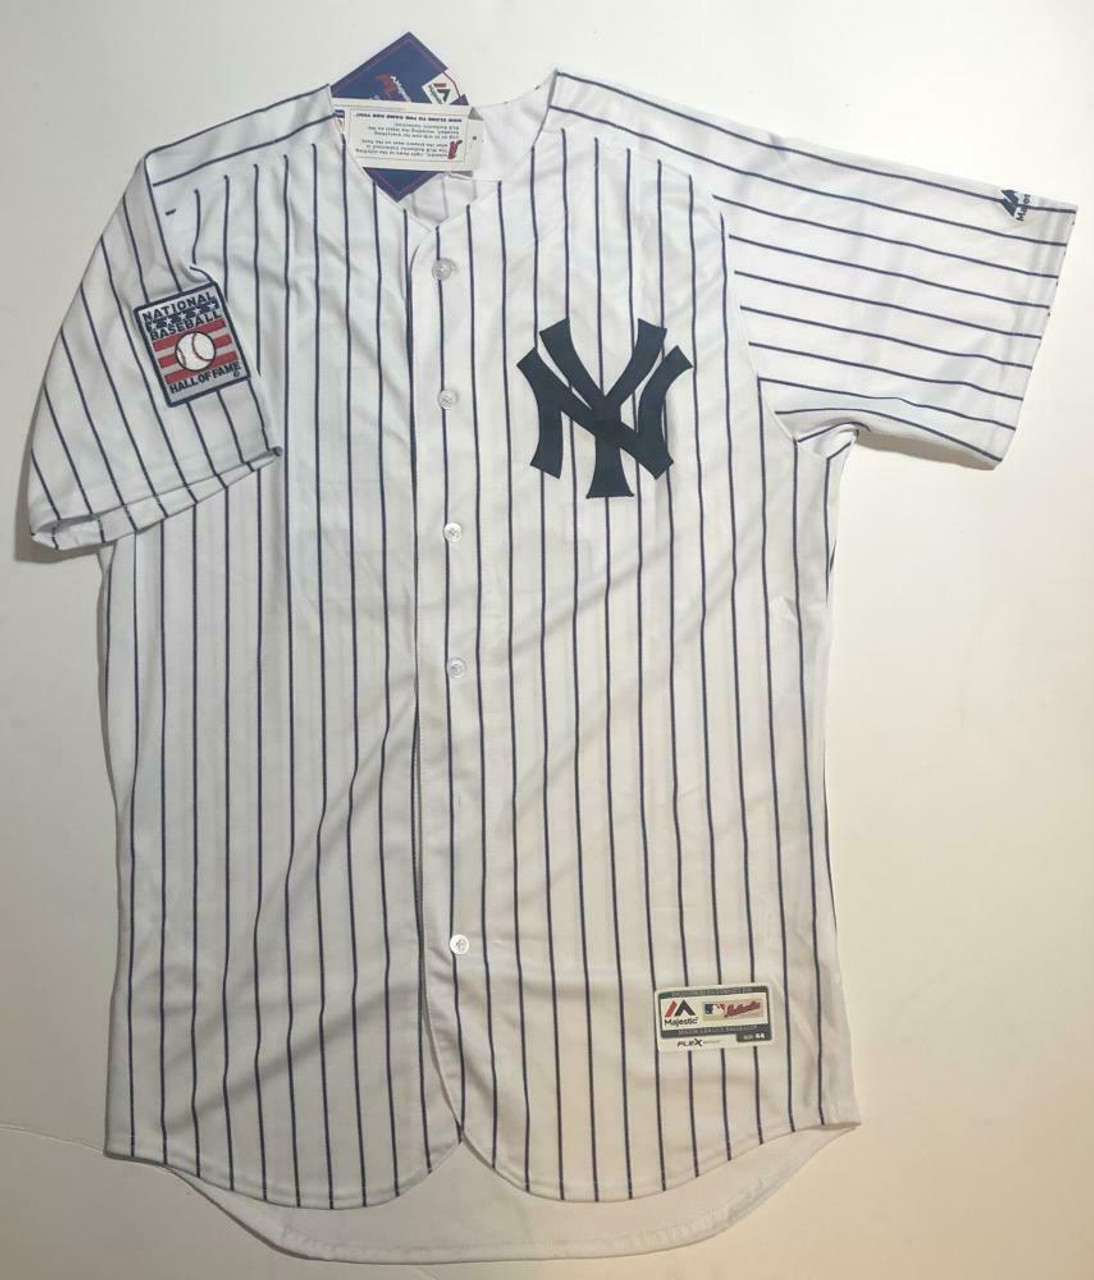 MARIANO RIVERA Autographed 1st Unanimous Vote Authentic Jersey